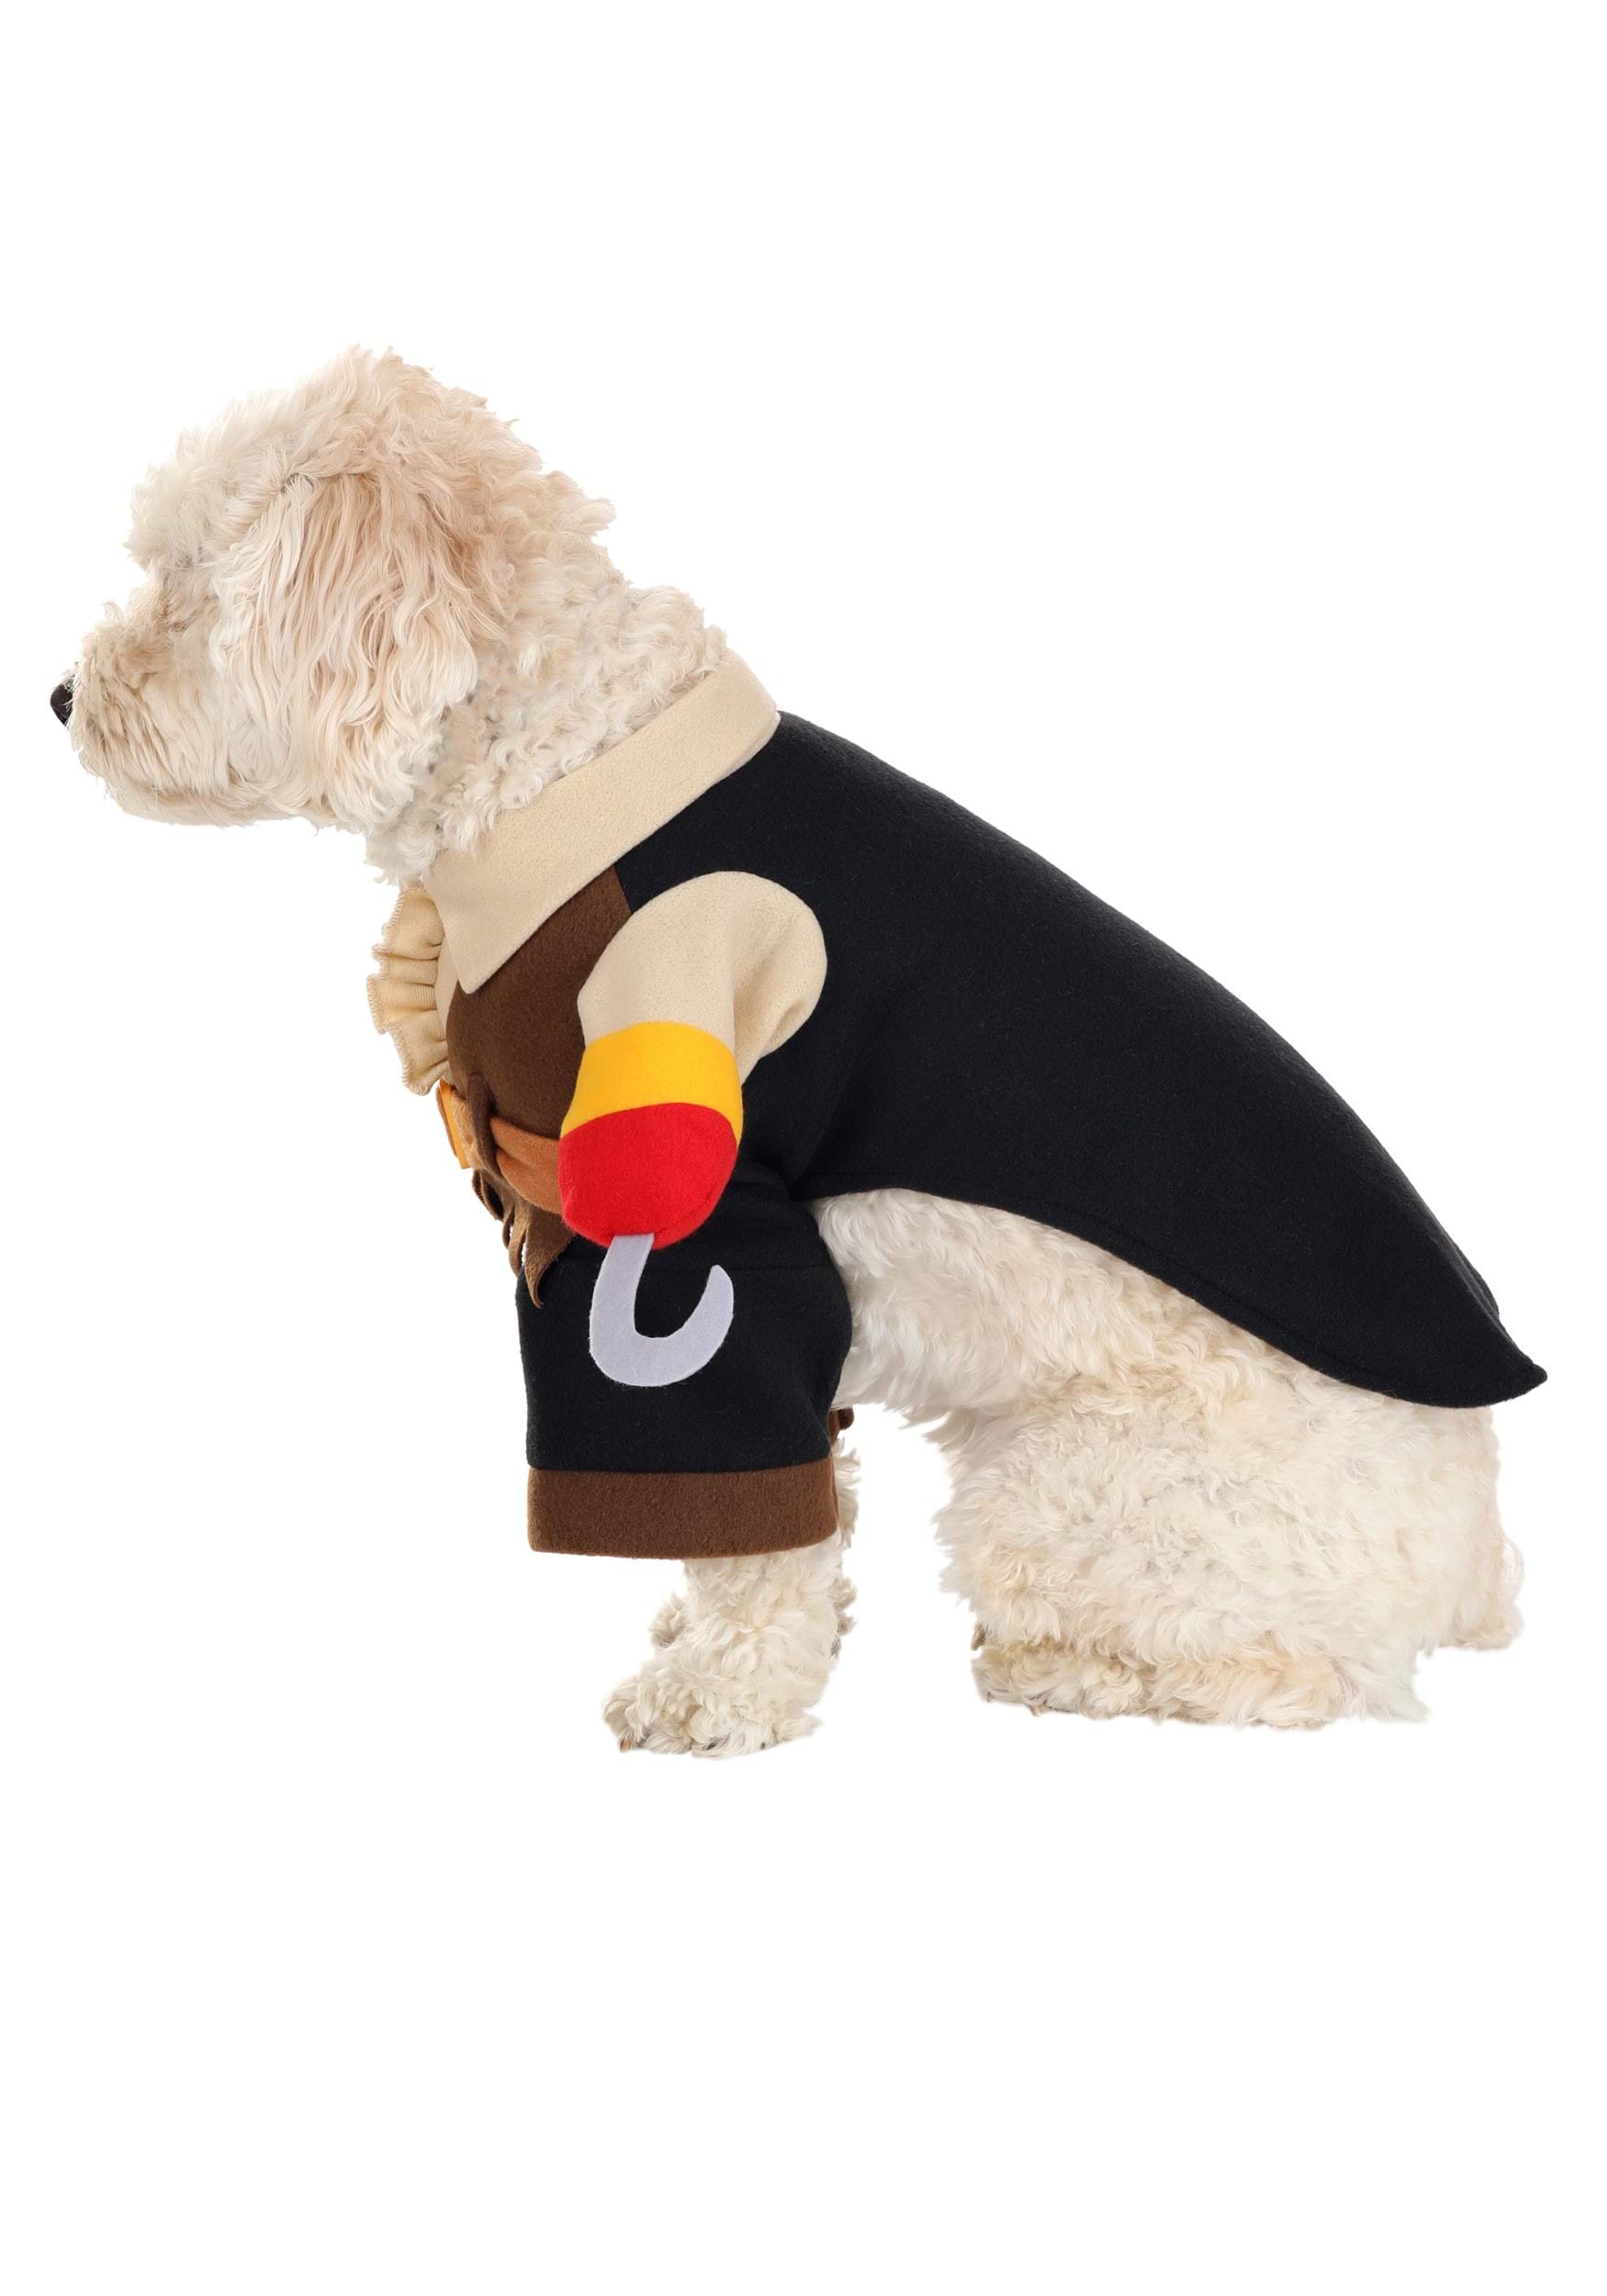 Pirate Costume For Dogs